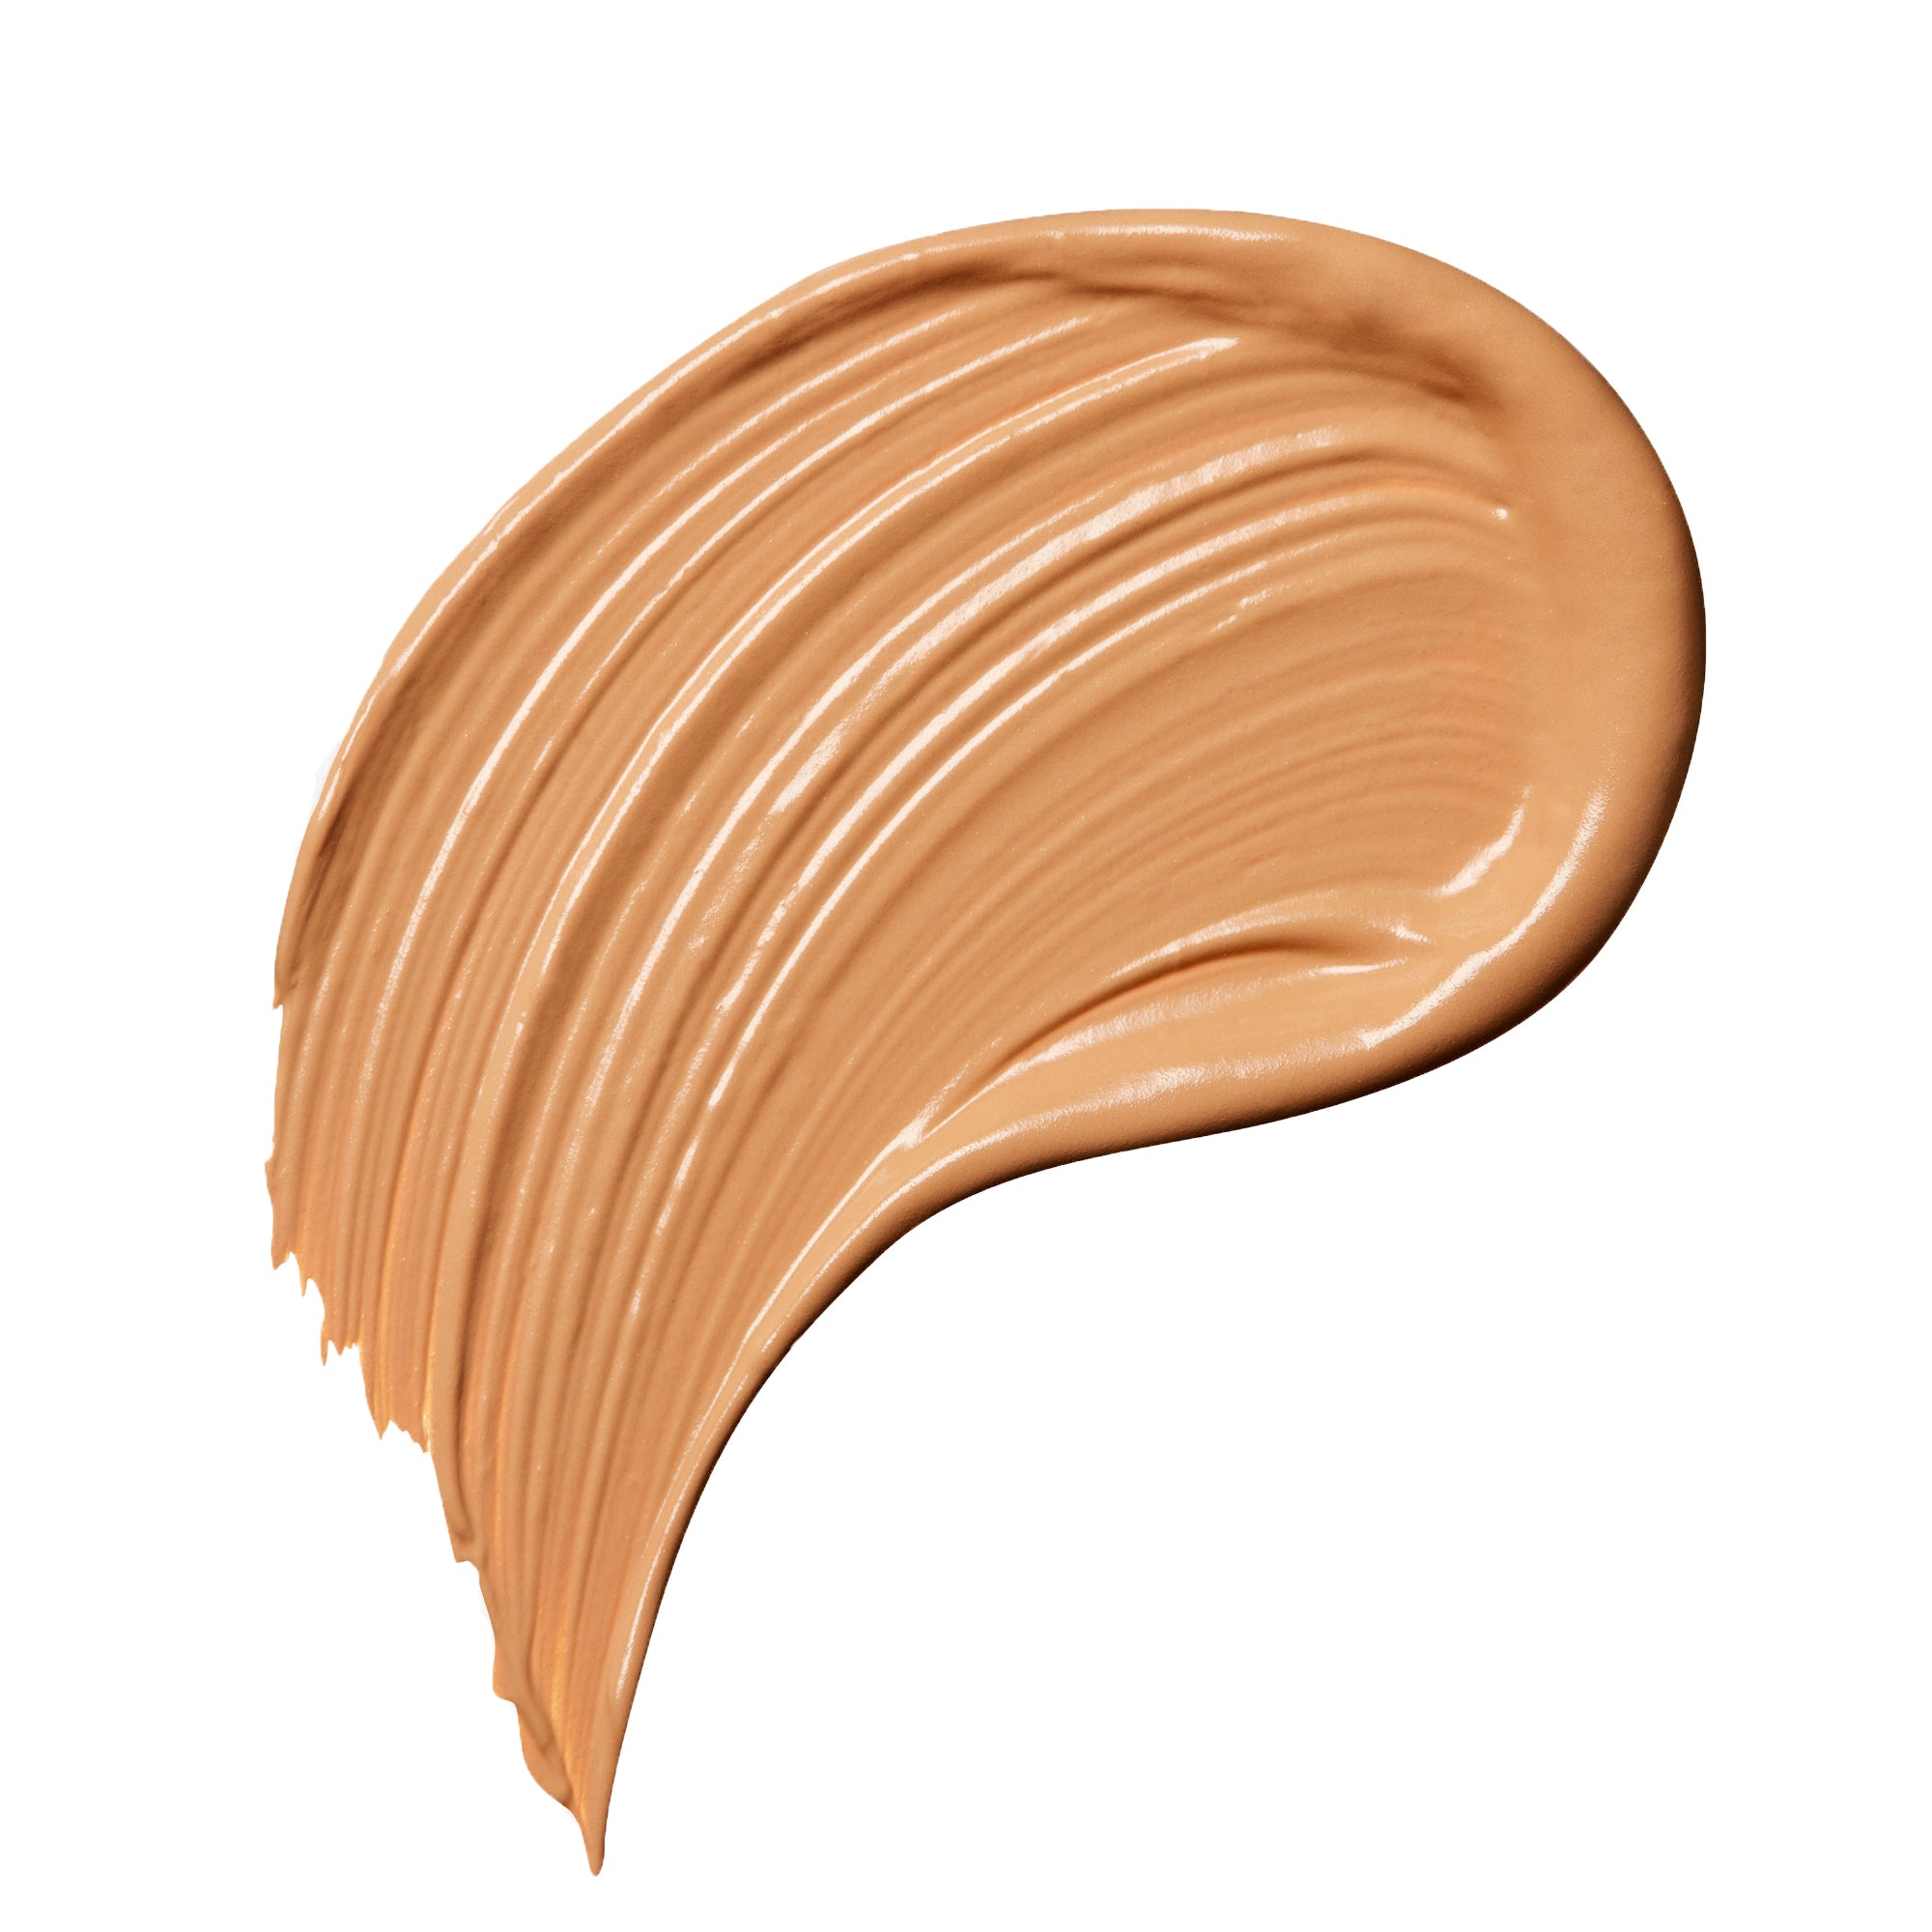 Rodial Glass Concealer / Shade 03 / Swatch